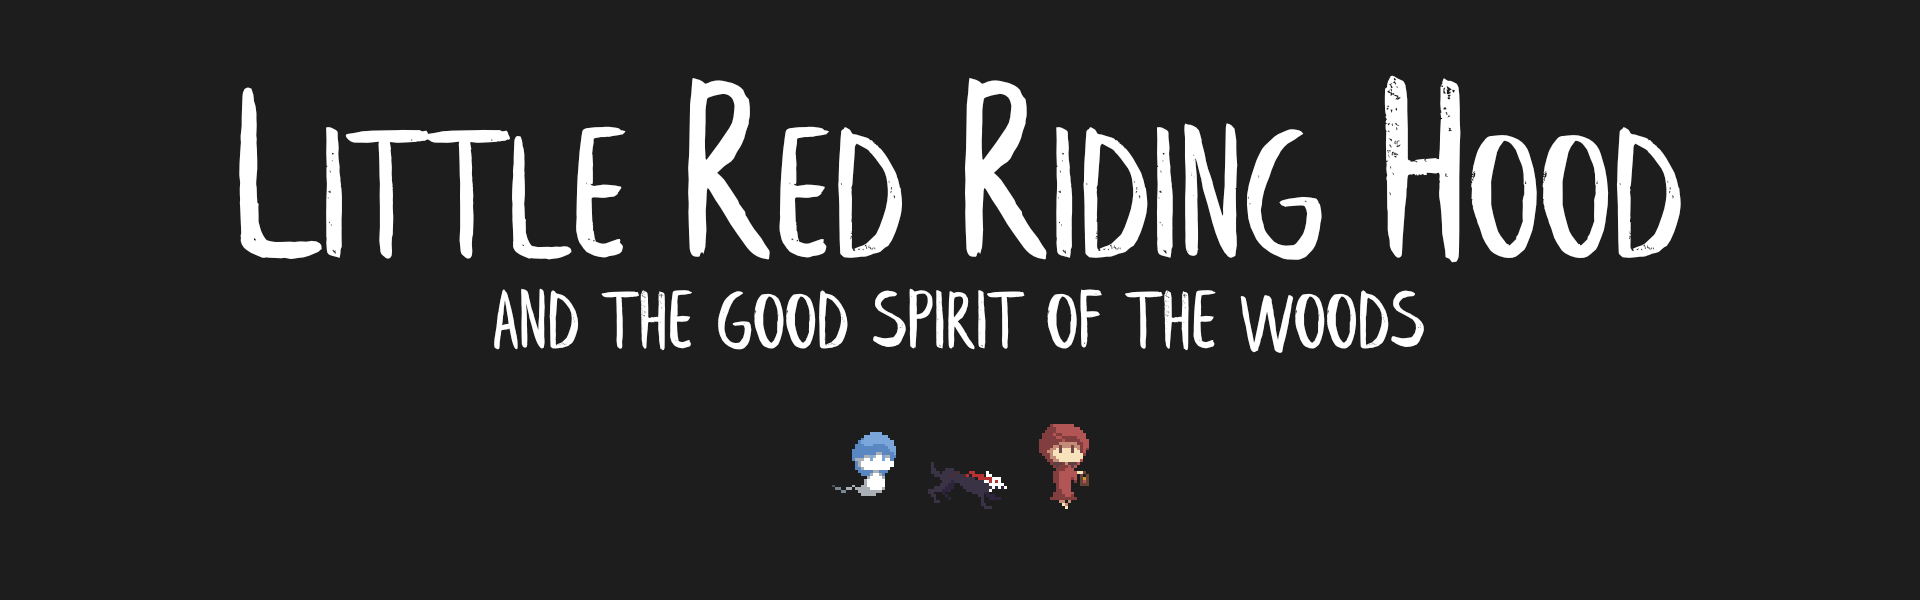 Little Red Riding Hood and the Good Spirit of the Woods